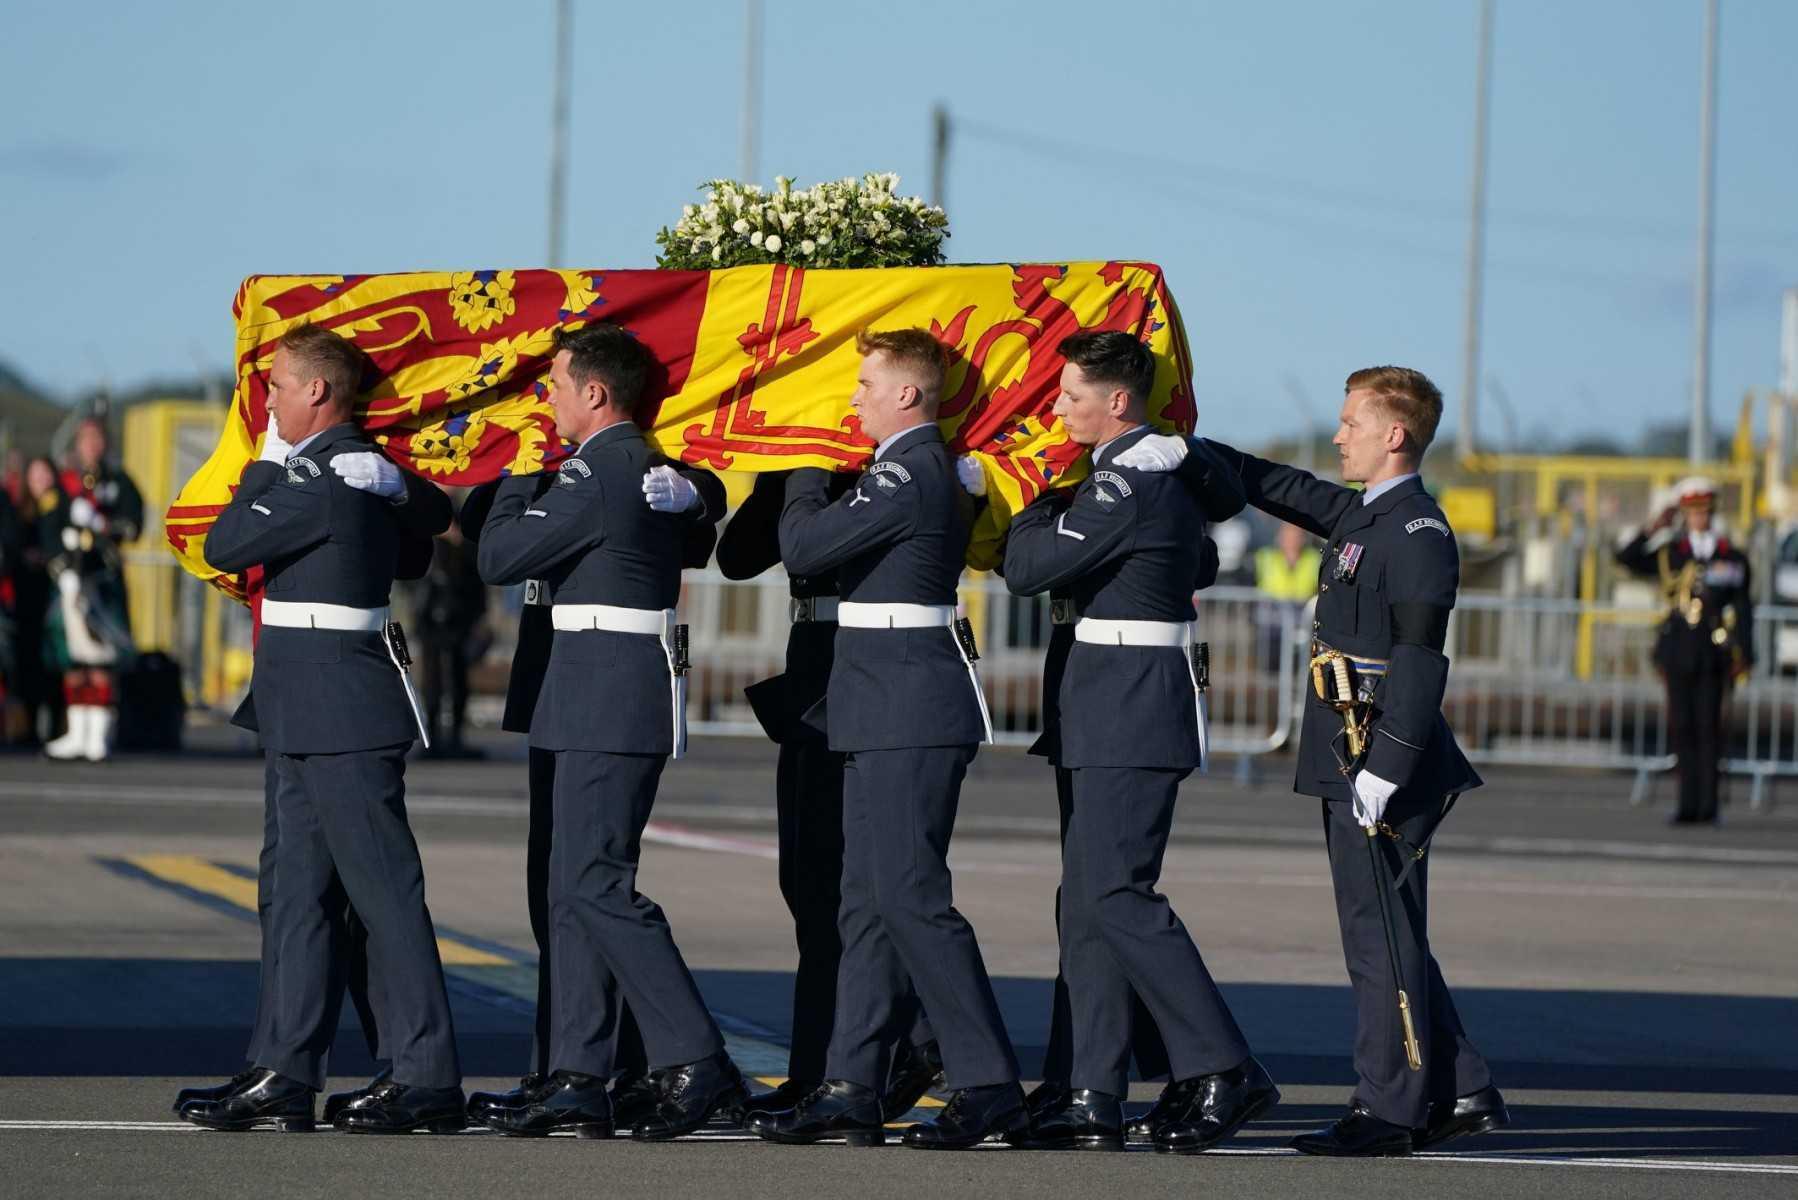 Pallbearers from the Queen's Colour Squadron of the Royal Air Force carry the coffin of Queen Elizabeth II at Edinburgh airport on Sept 13, before it is transported to Buckingham Palace in London. Photo: AFP 